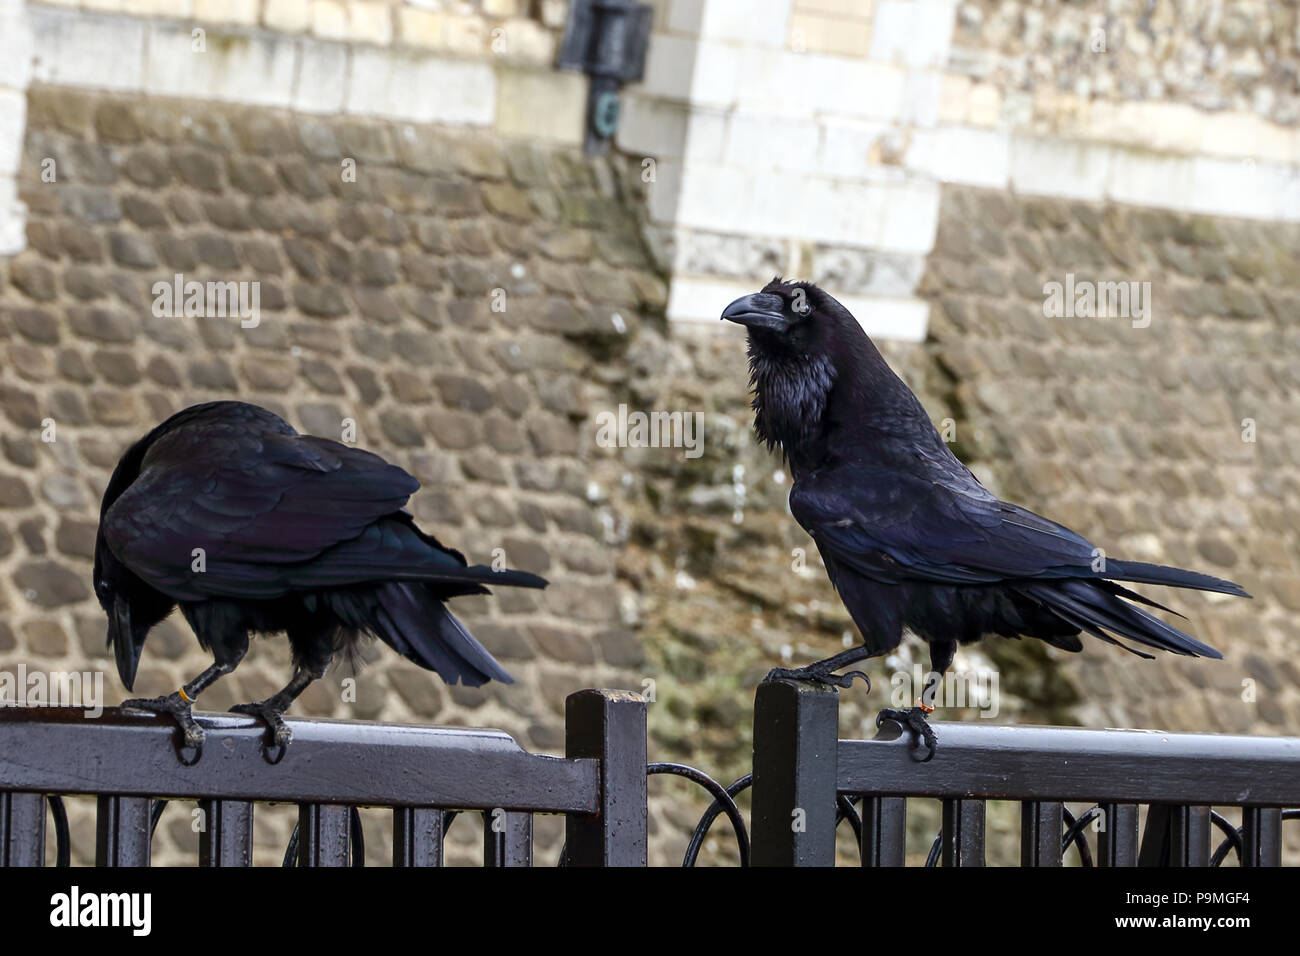 The Ravens of the Tower of London are a group of at least six captive ravens which live at the Tower of London